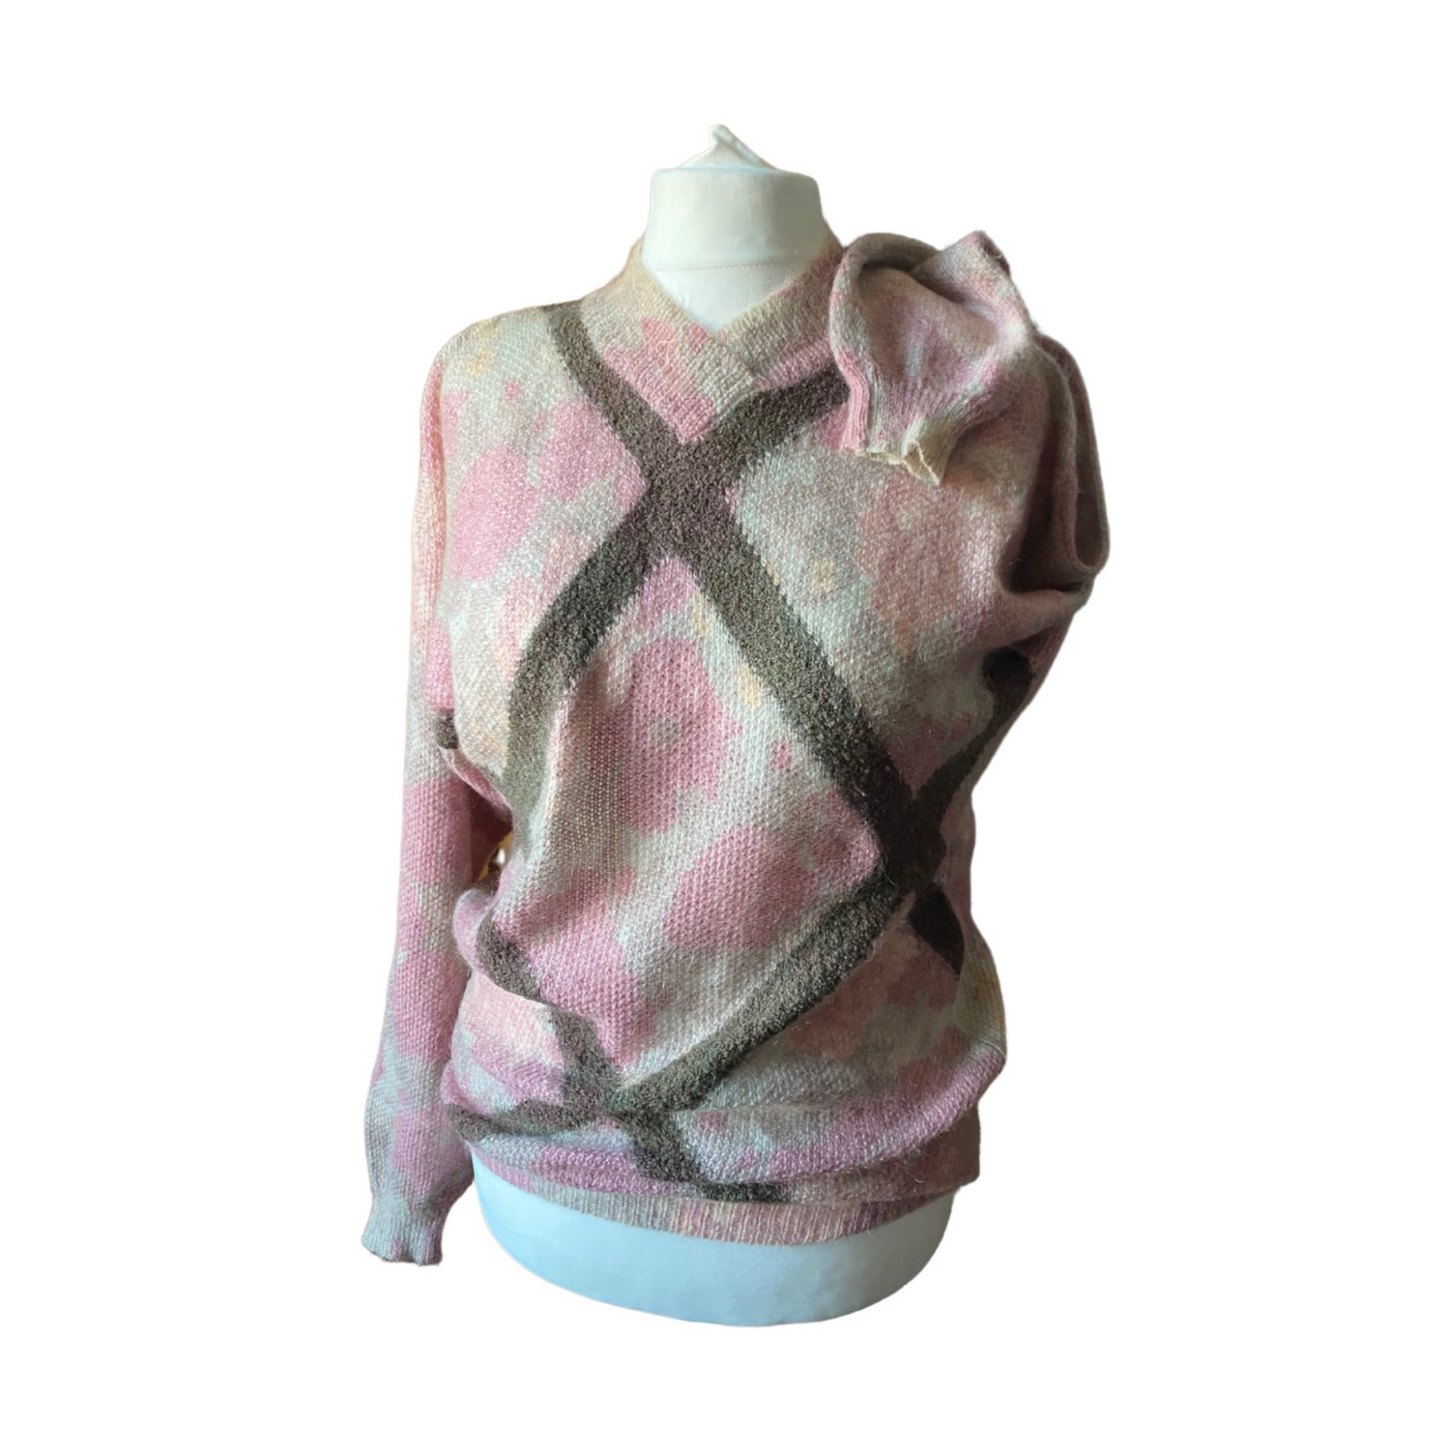 80s pink and brown floral and geometric print mohair blend jumper. Approx UK size 16-20